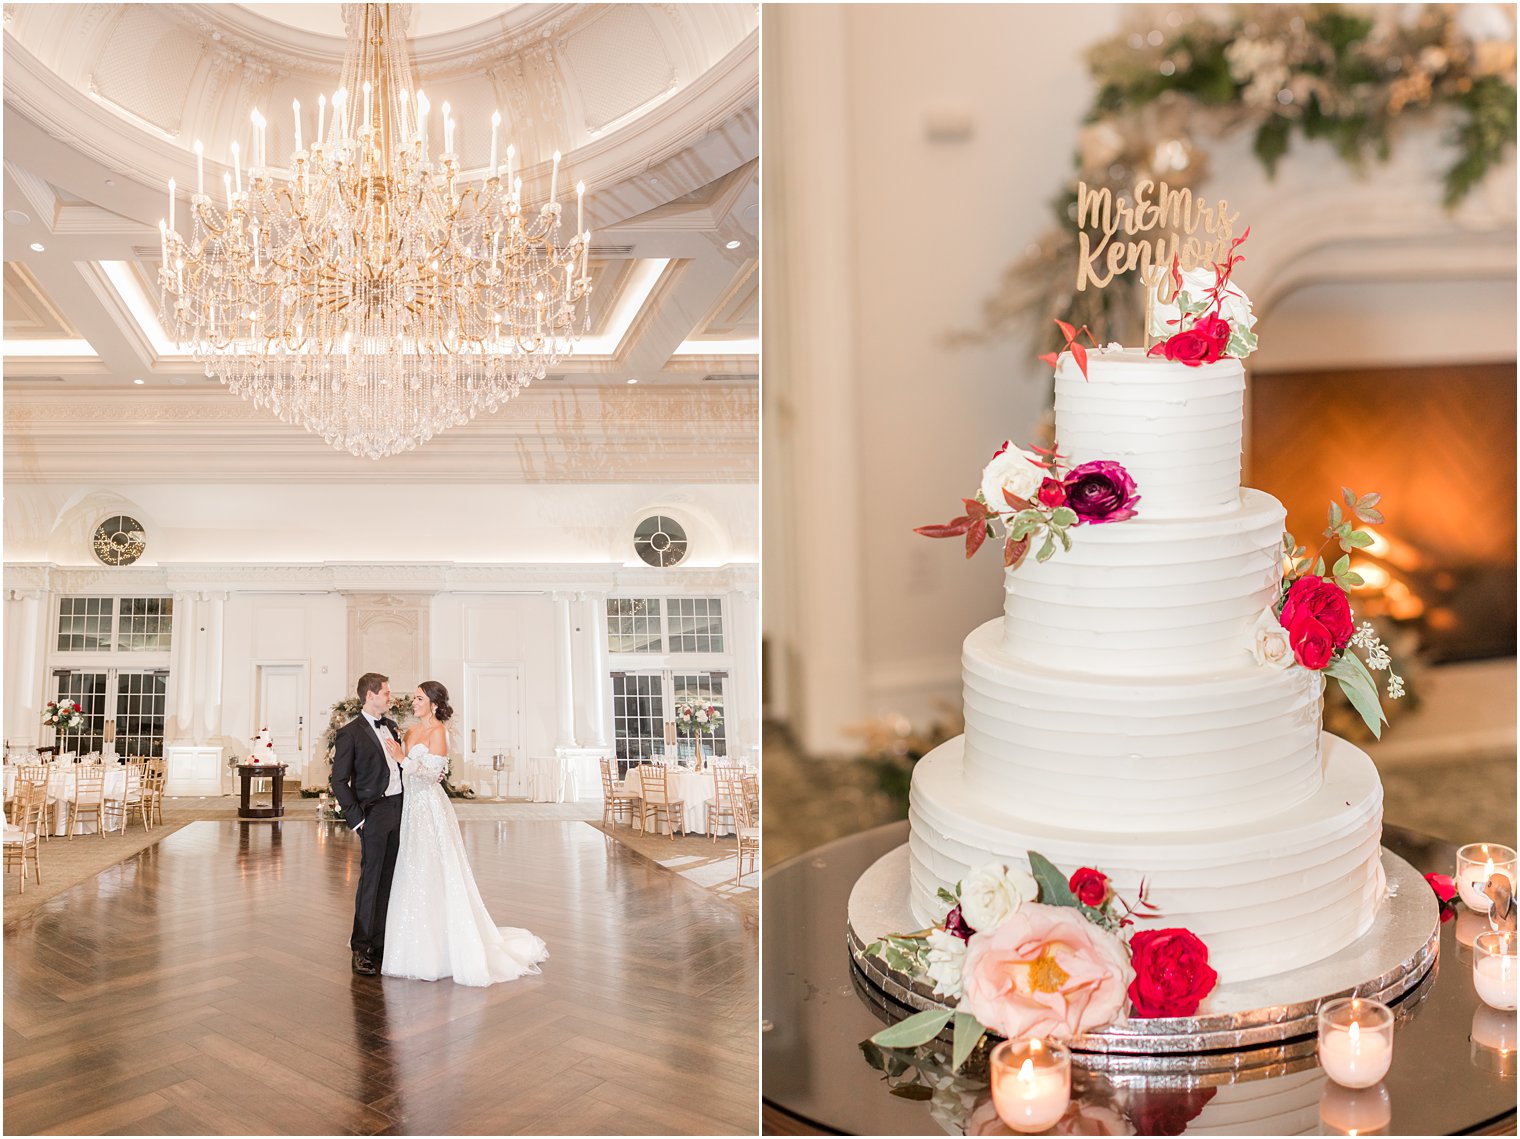 newlyweds stand together in ballroom at Park Chateau Estate with wedding cake